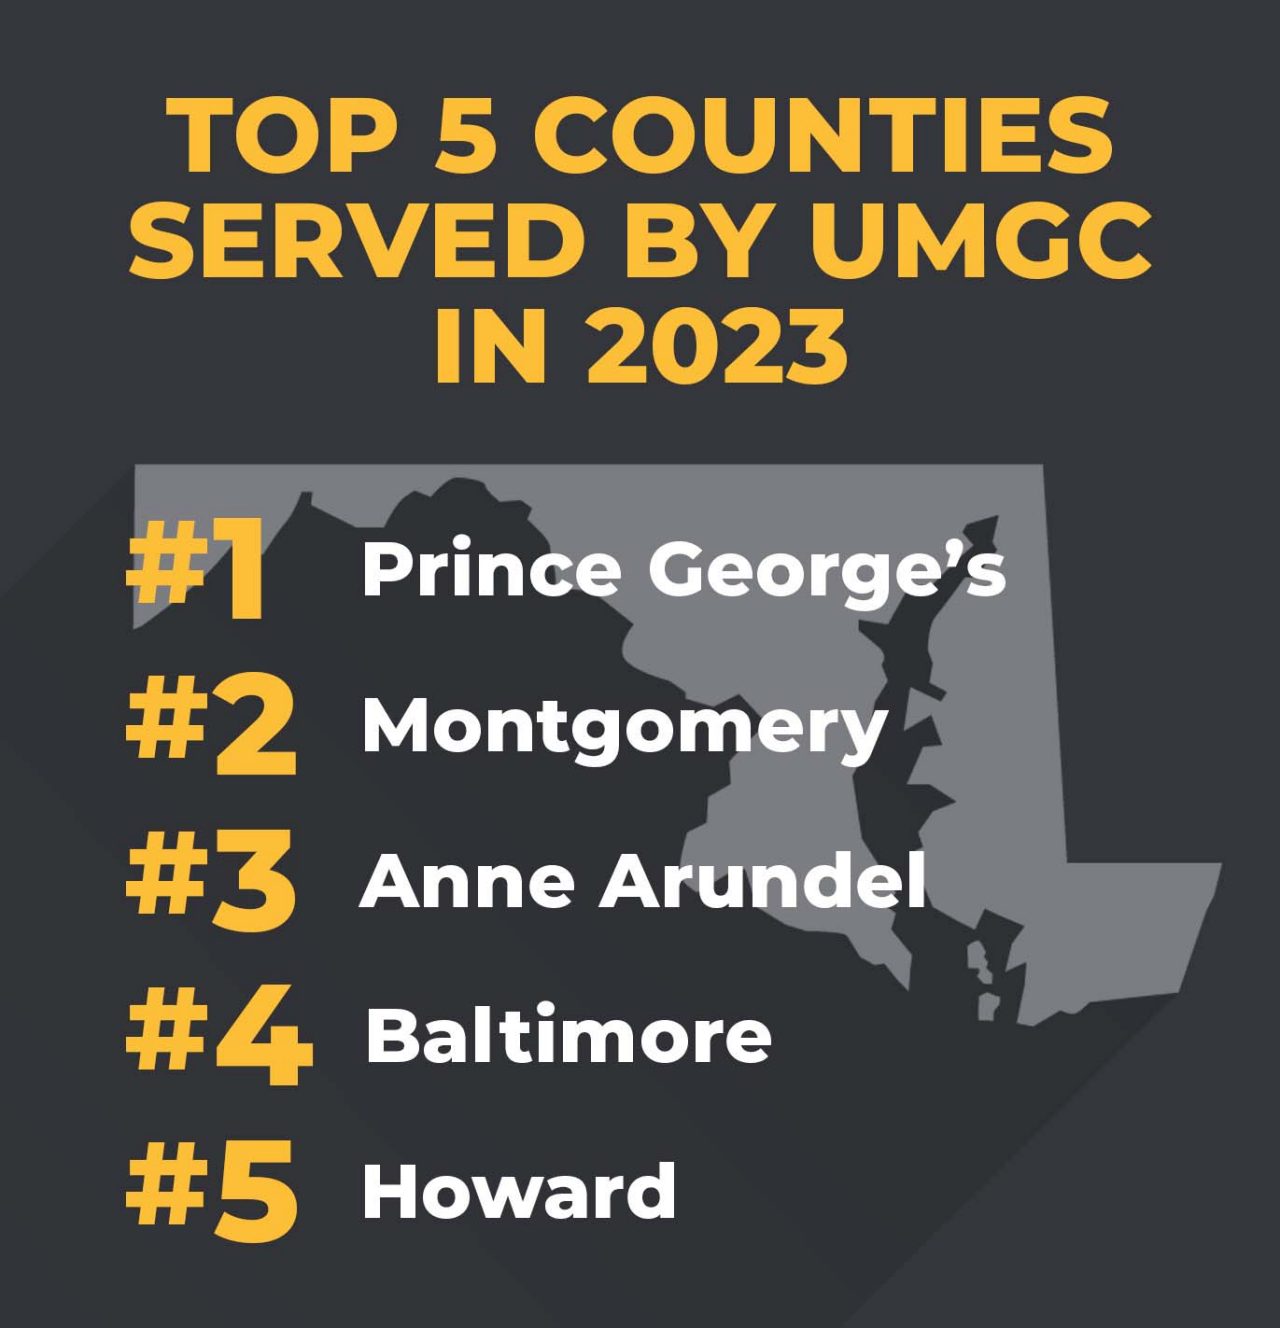 Text that reads, "Top 5 Counties Served by UMGC in 2023; #1 Prince George's; #2 Montgomery; #3 Anne Arundel; #4 Baltimore; #5 Howard."